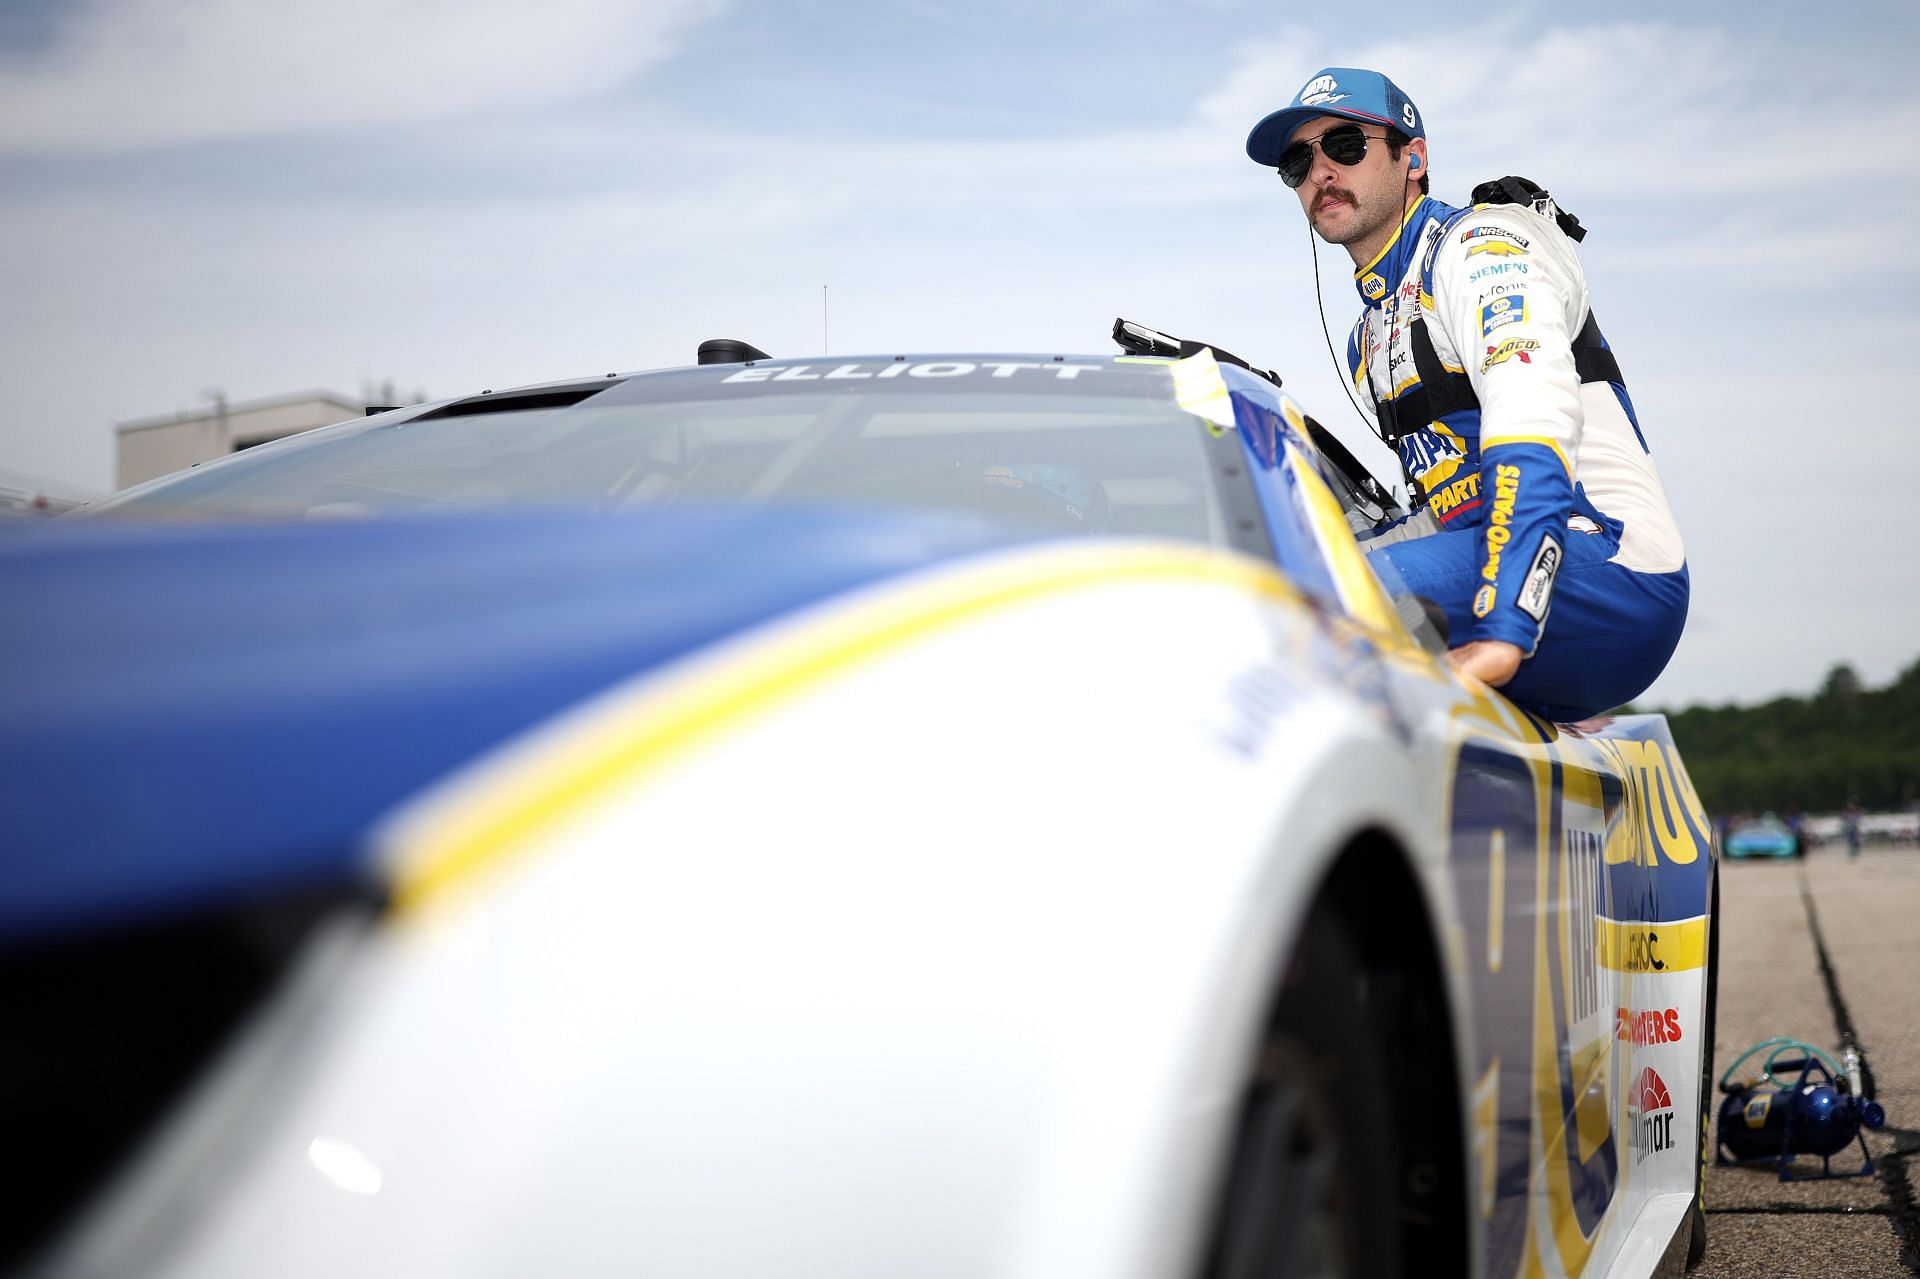 Chase Elliott enters his car during qualifying for the 2022 NASCAR Cup Series Ambetter 301 at New Hampshire Motor Speedway in Loudon, New Hampshire. (Photo by James Gilbert/Getty Images)